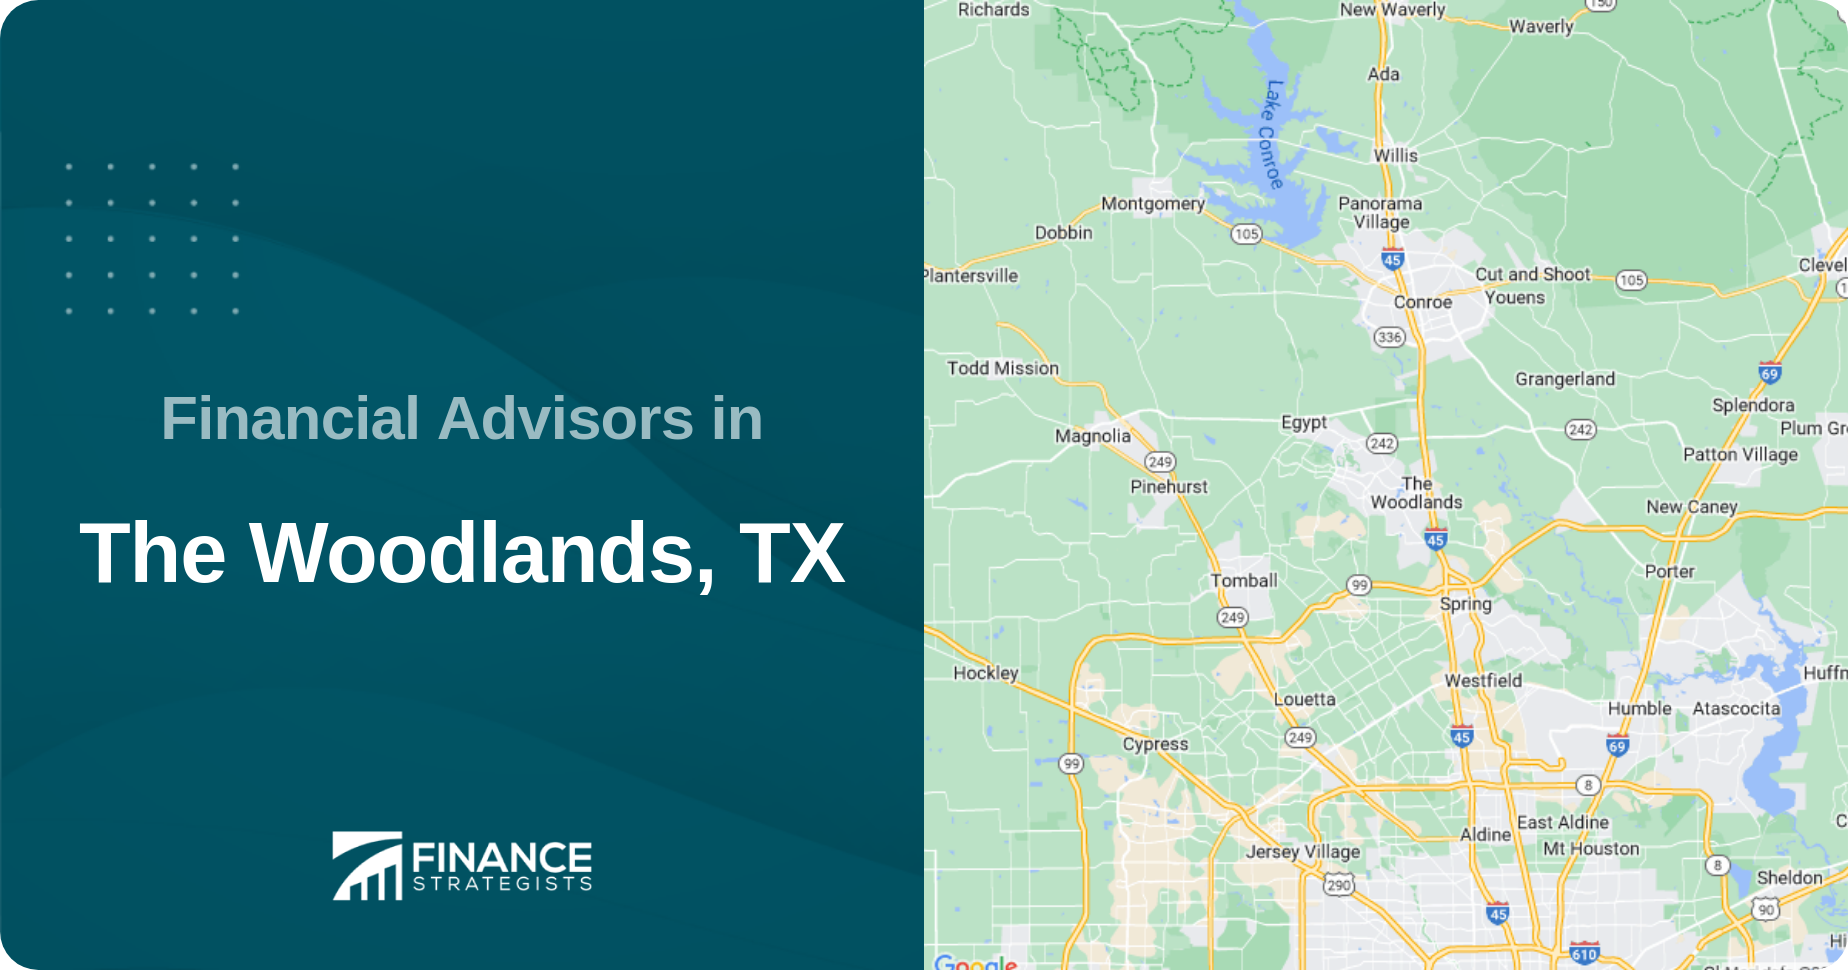 Financial Advisors in The Woodlands, TX